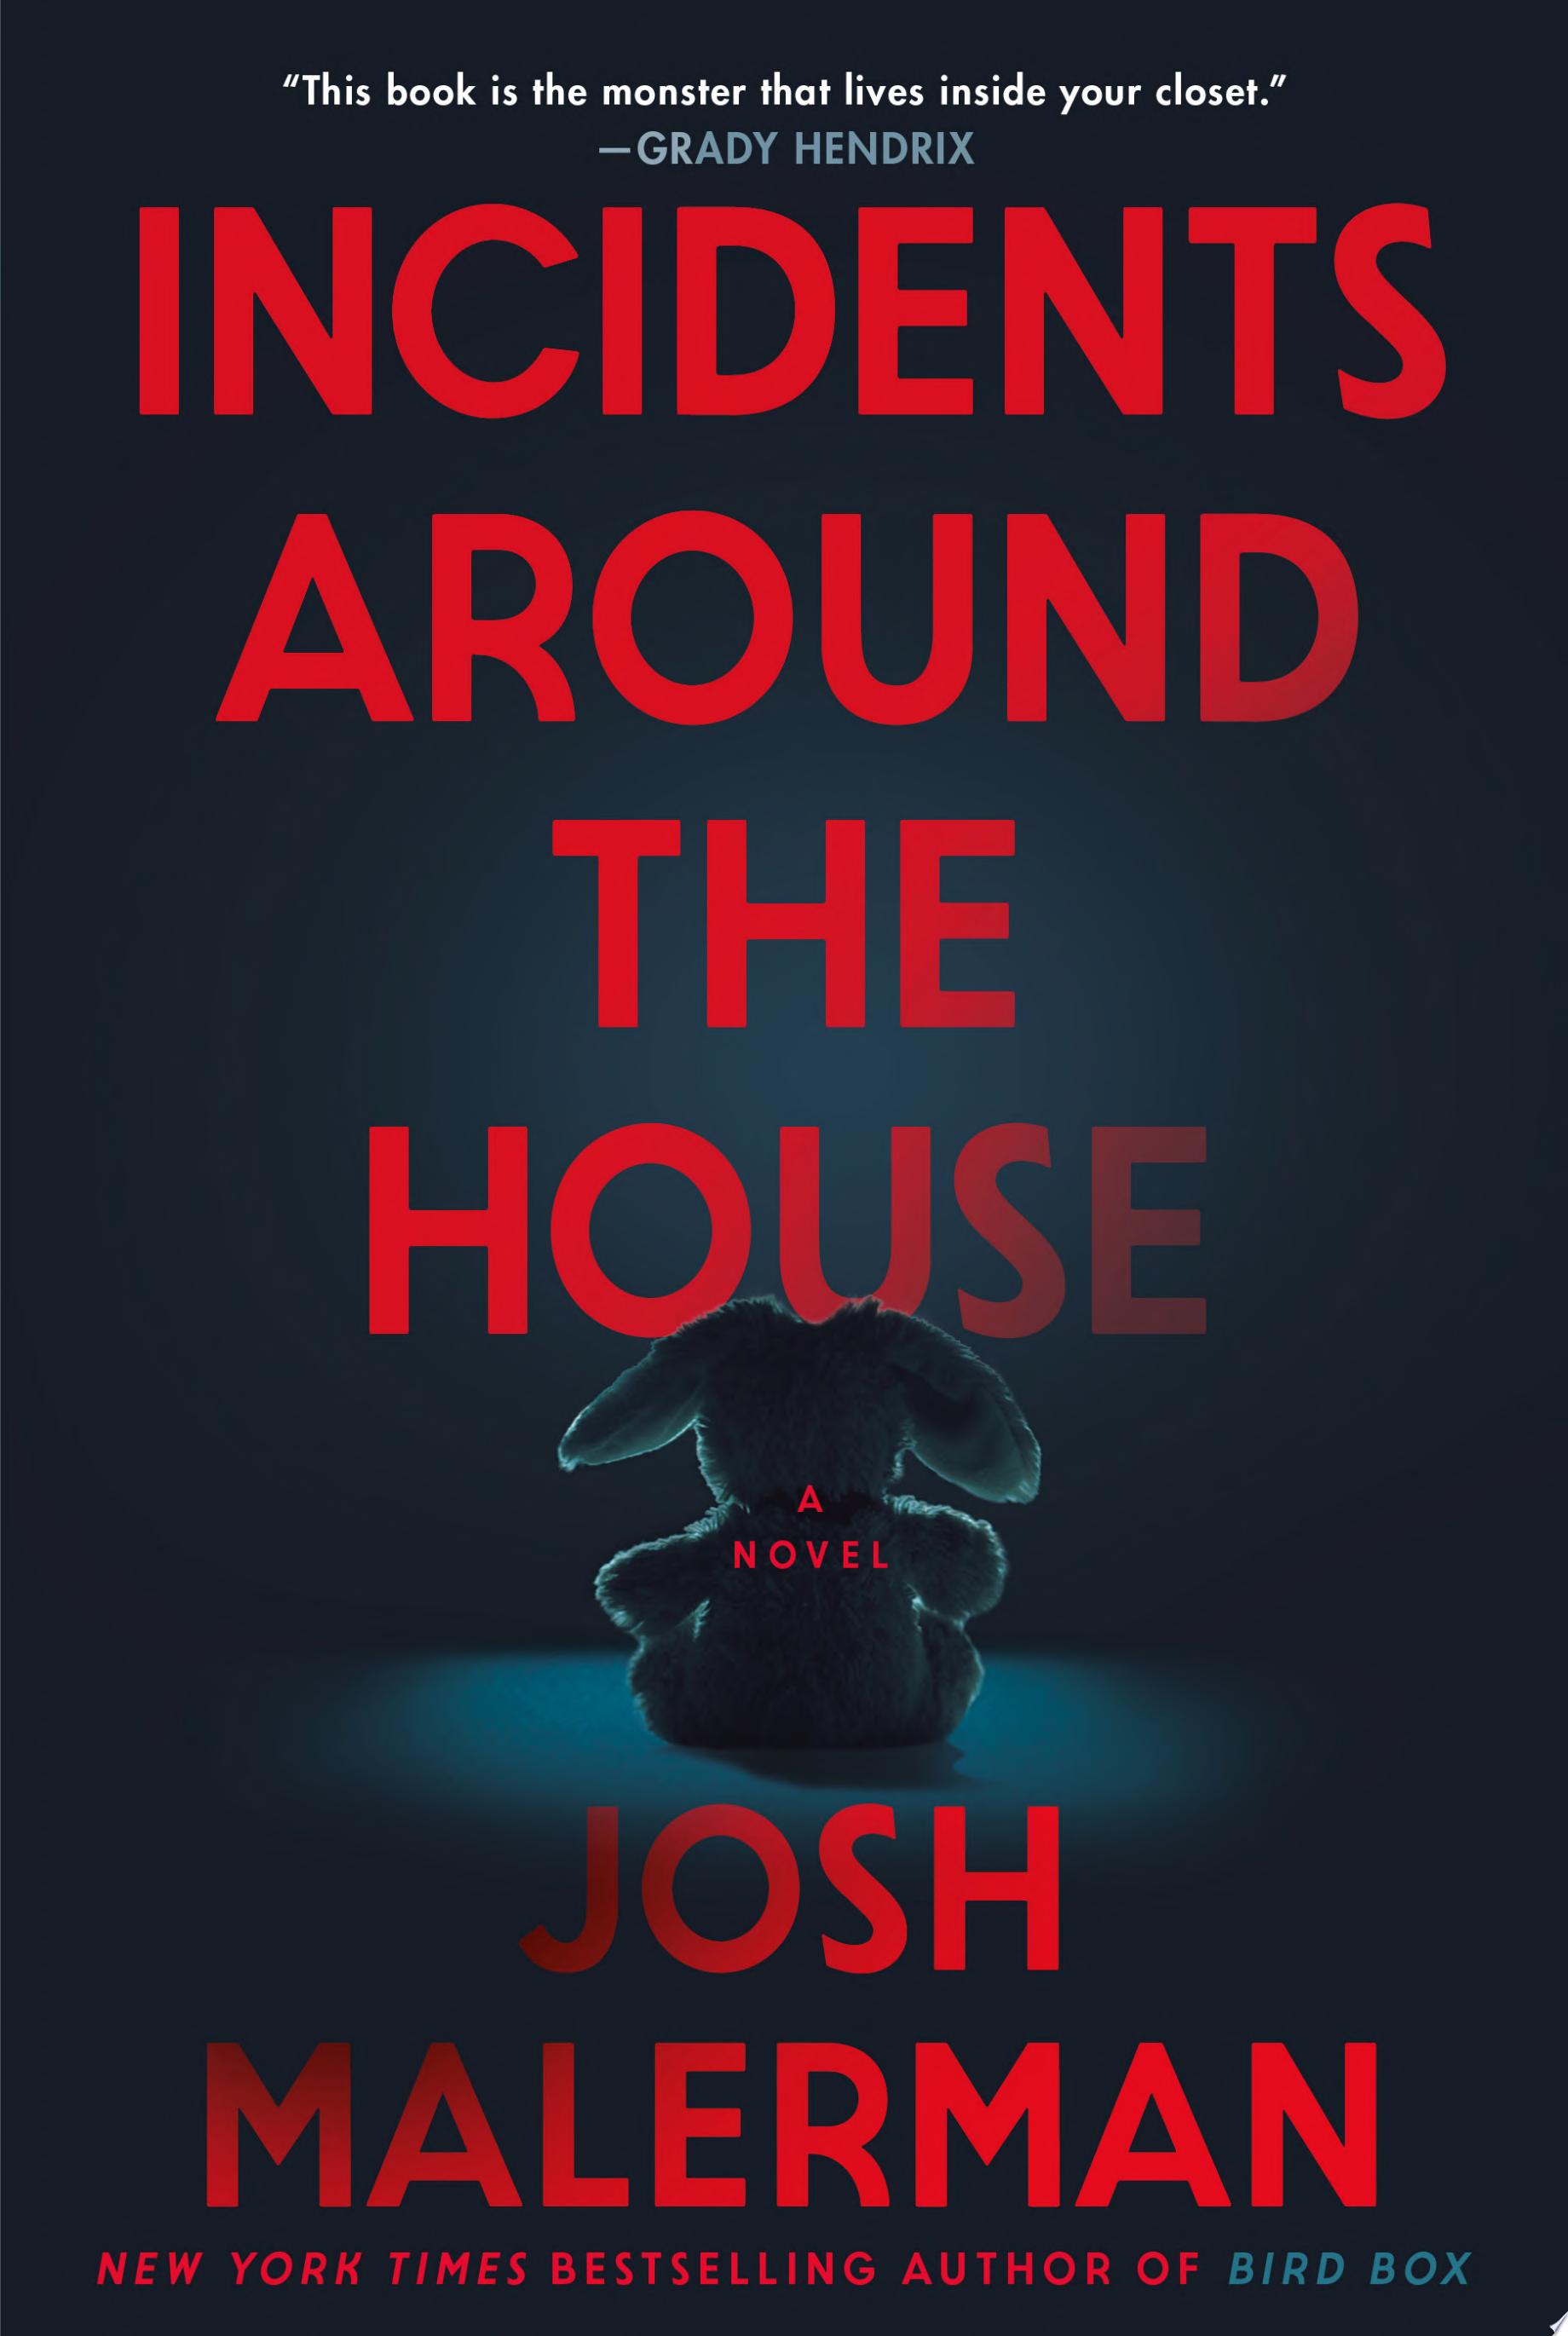 Image for "Incidents Around the House"